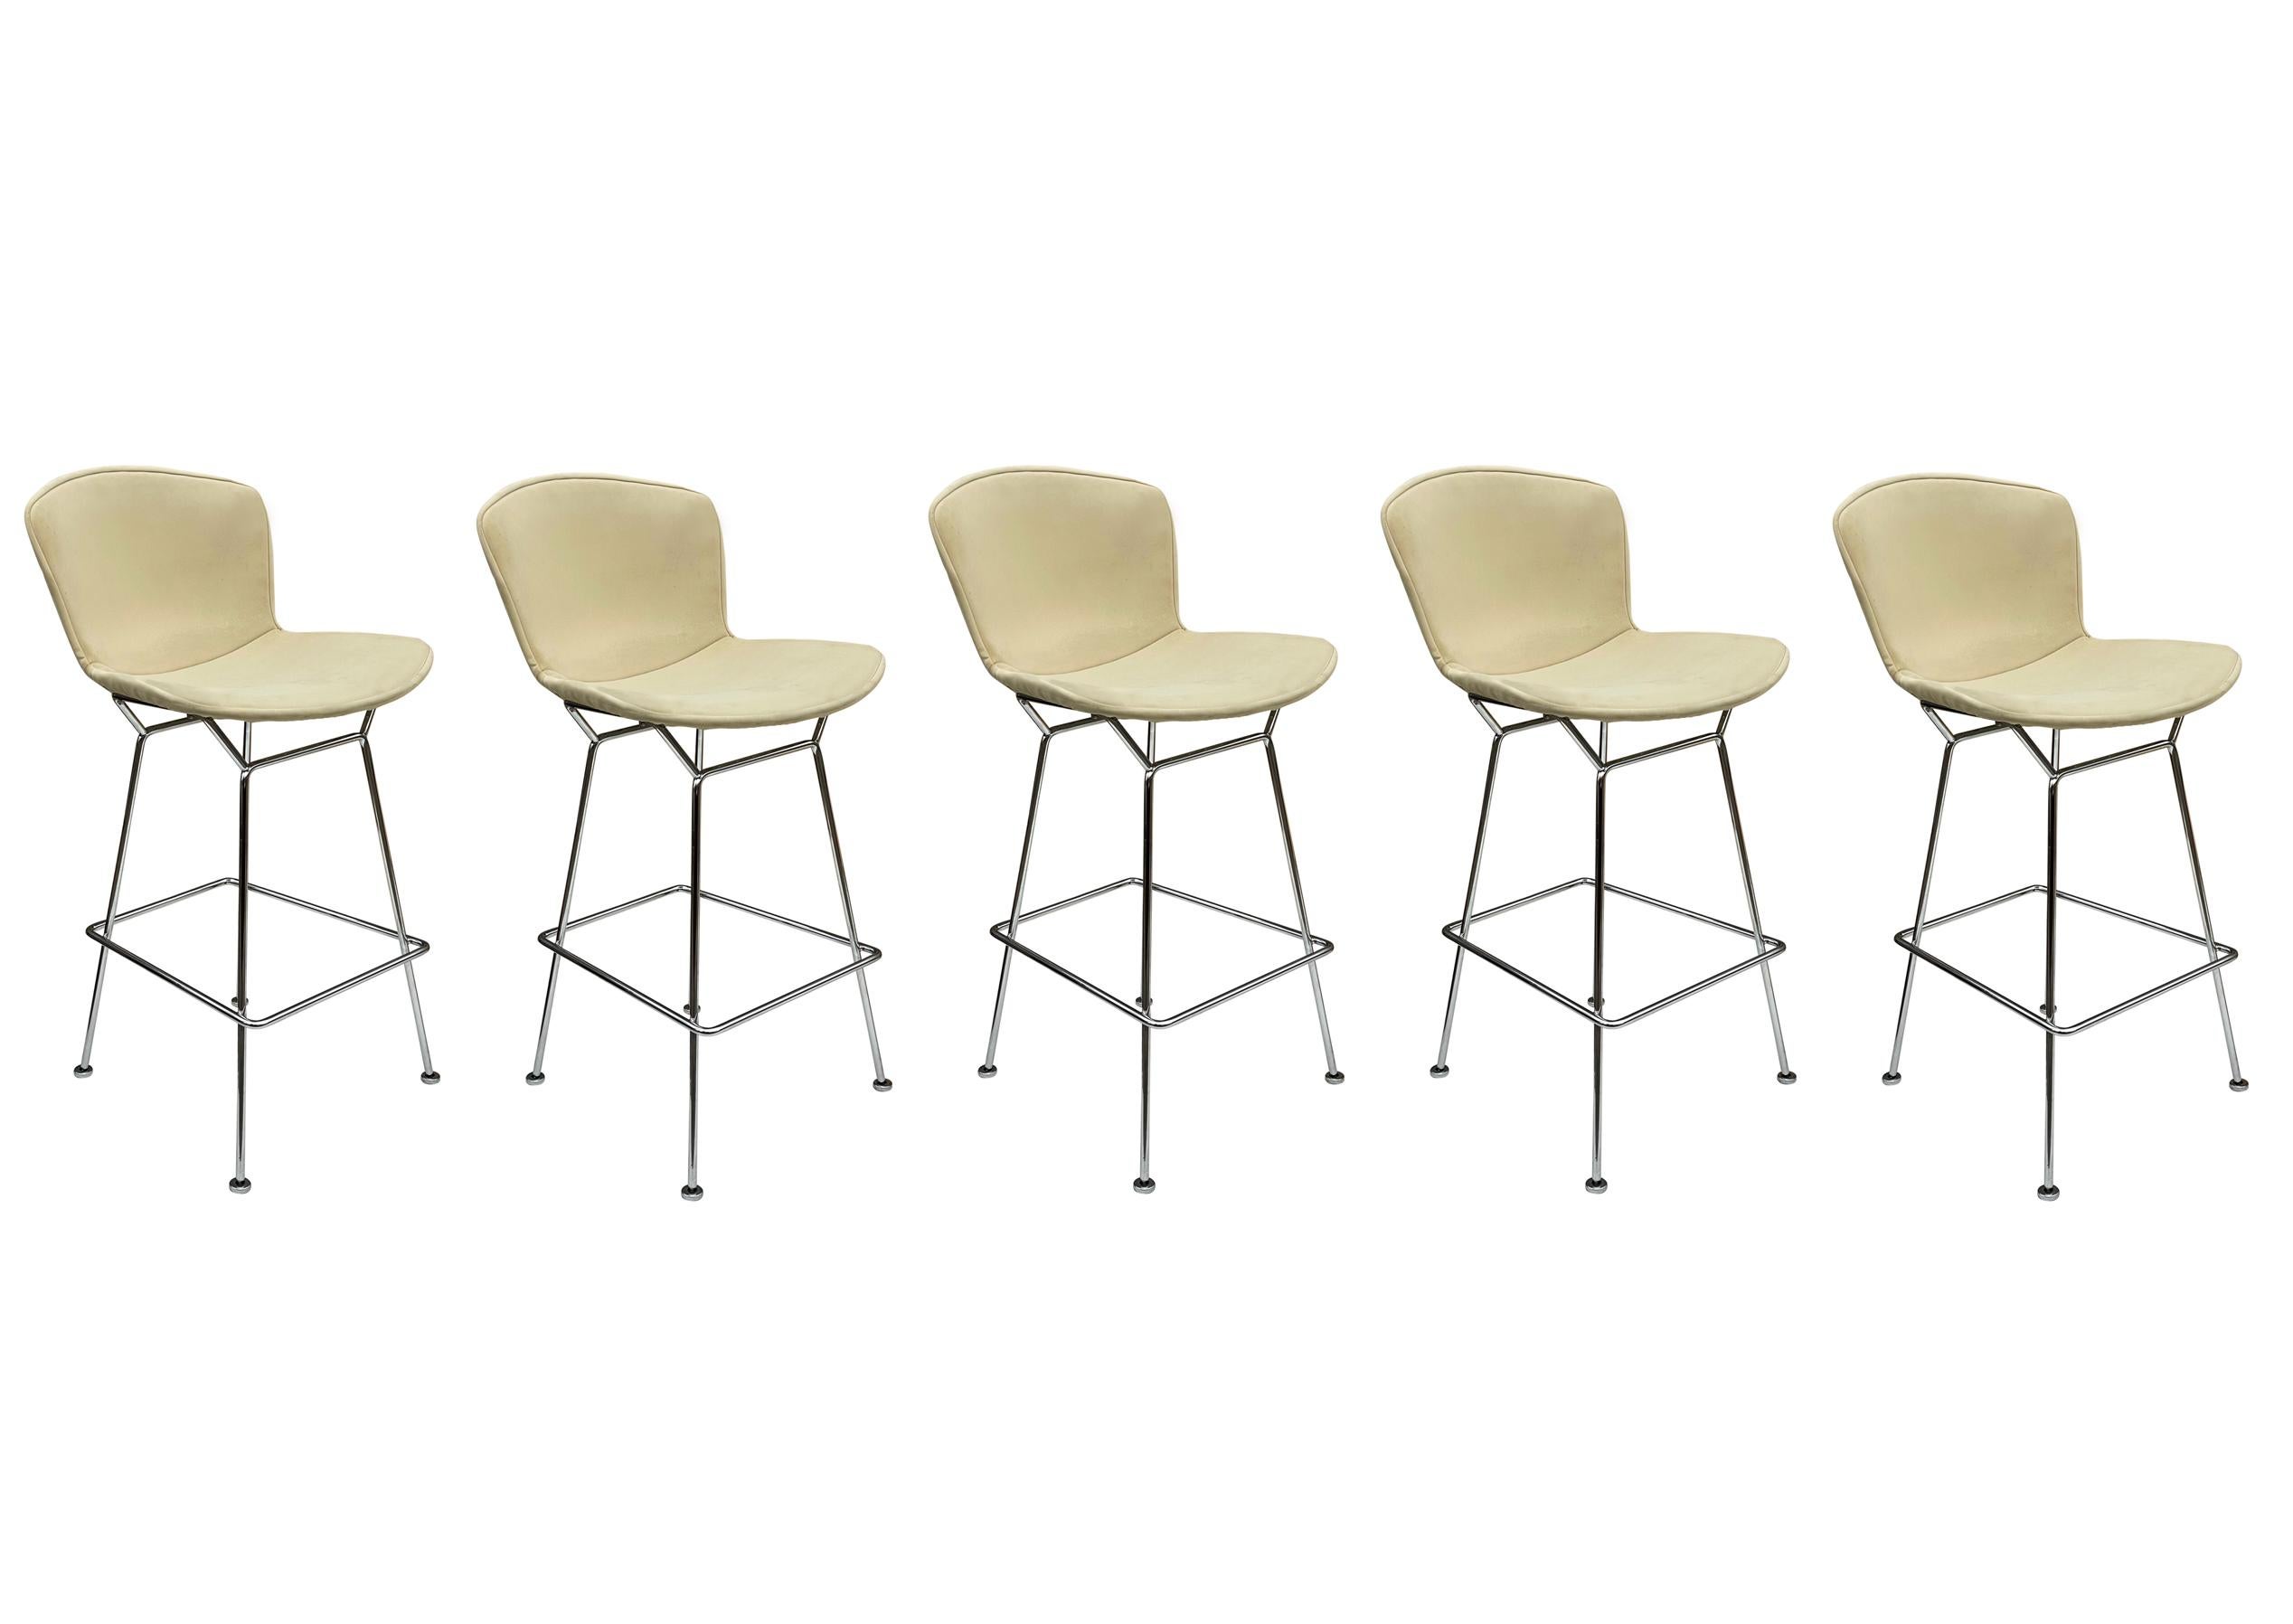 Late 20th Century Set of Five Mid-Century Modern Harry Bertoia for Knoll Wire Bar Stools